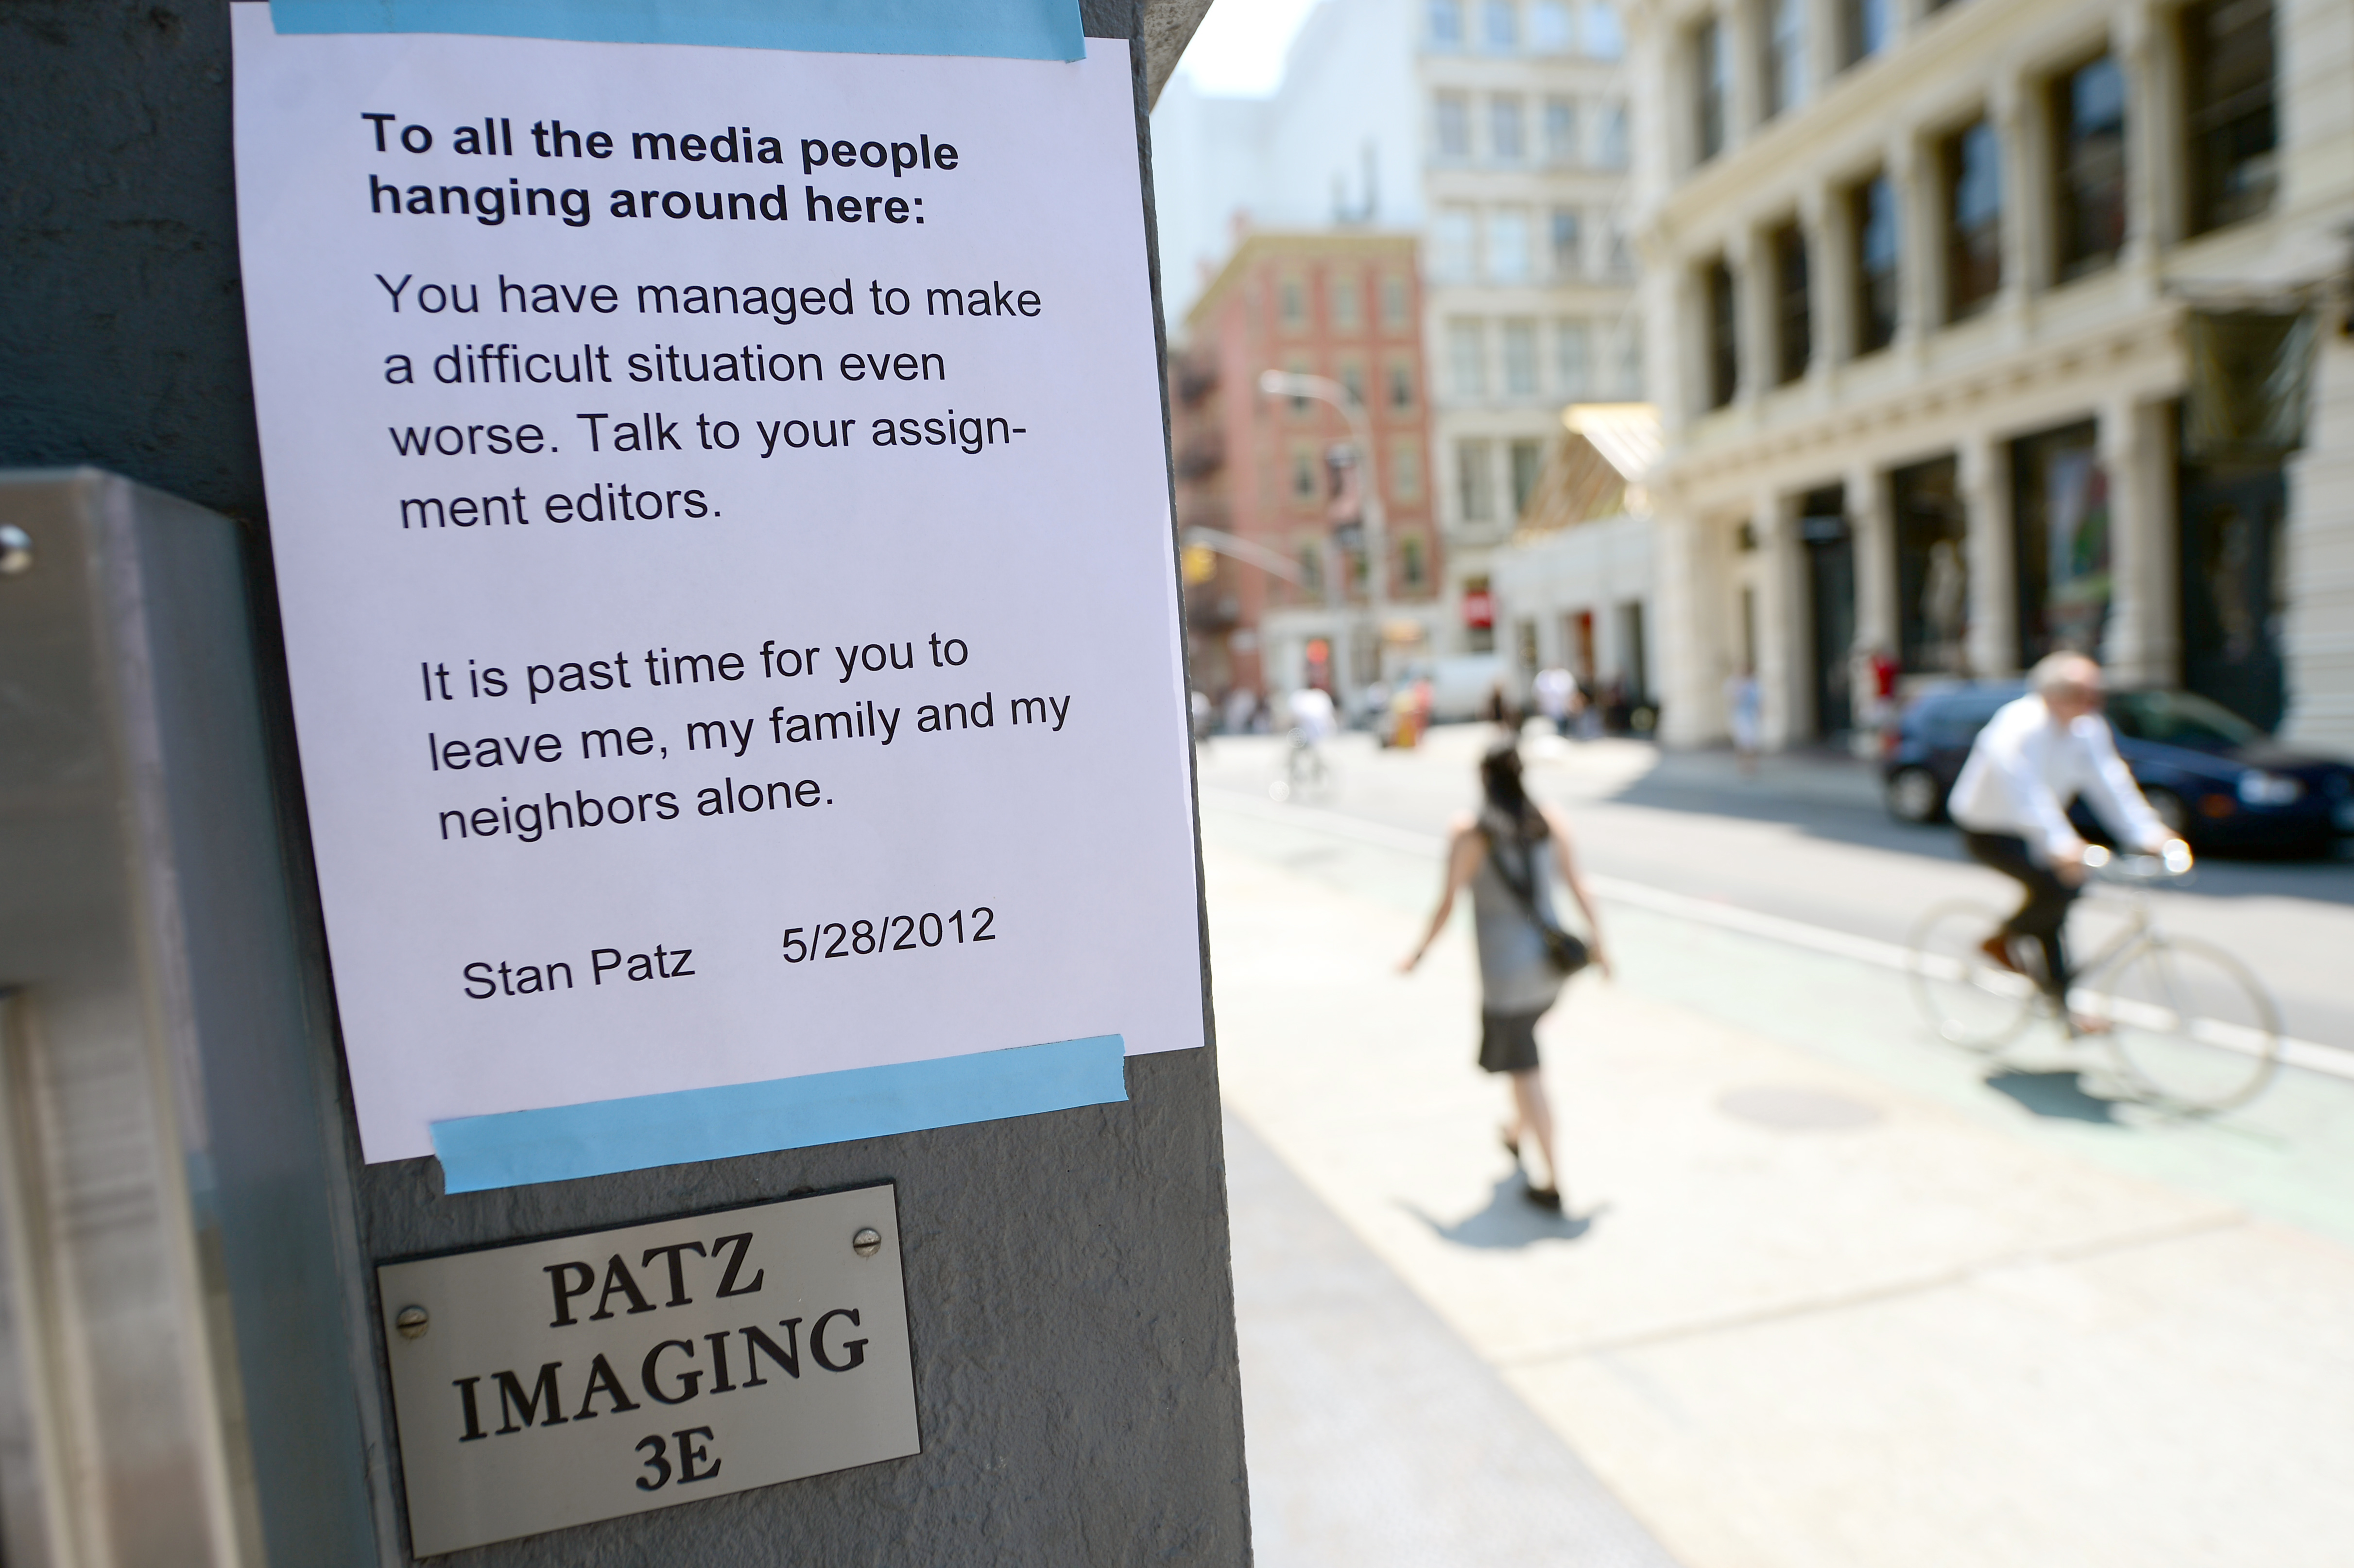 A notice to the media from Stan Patz 